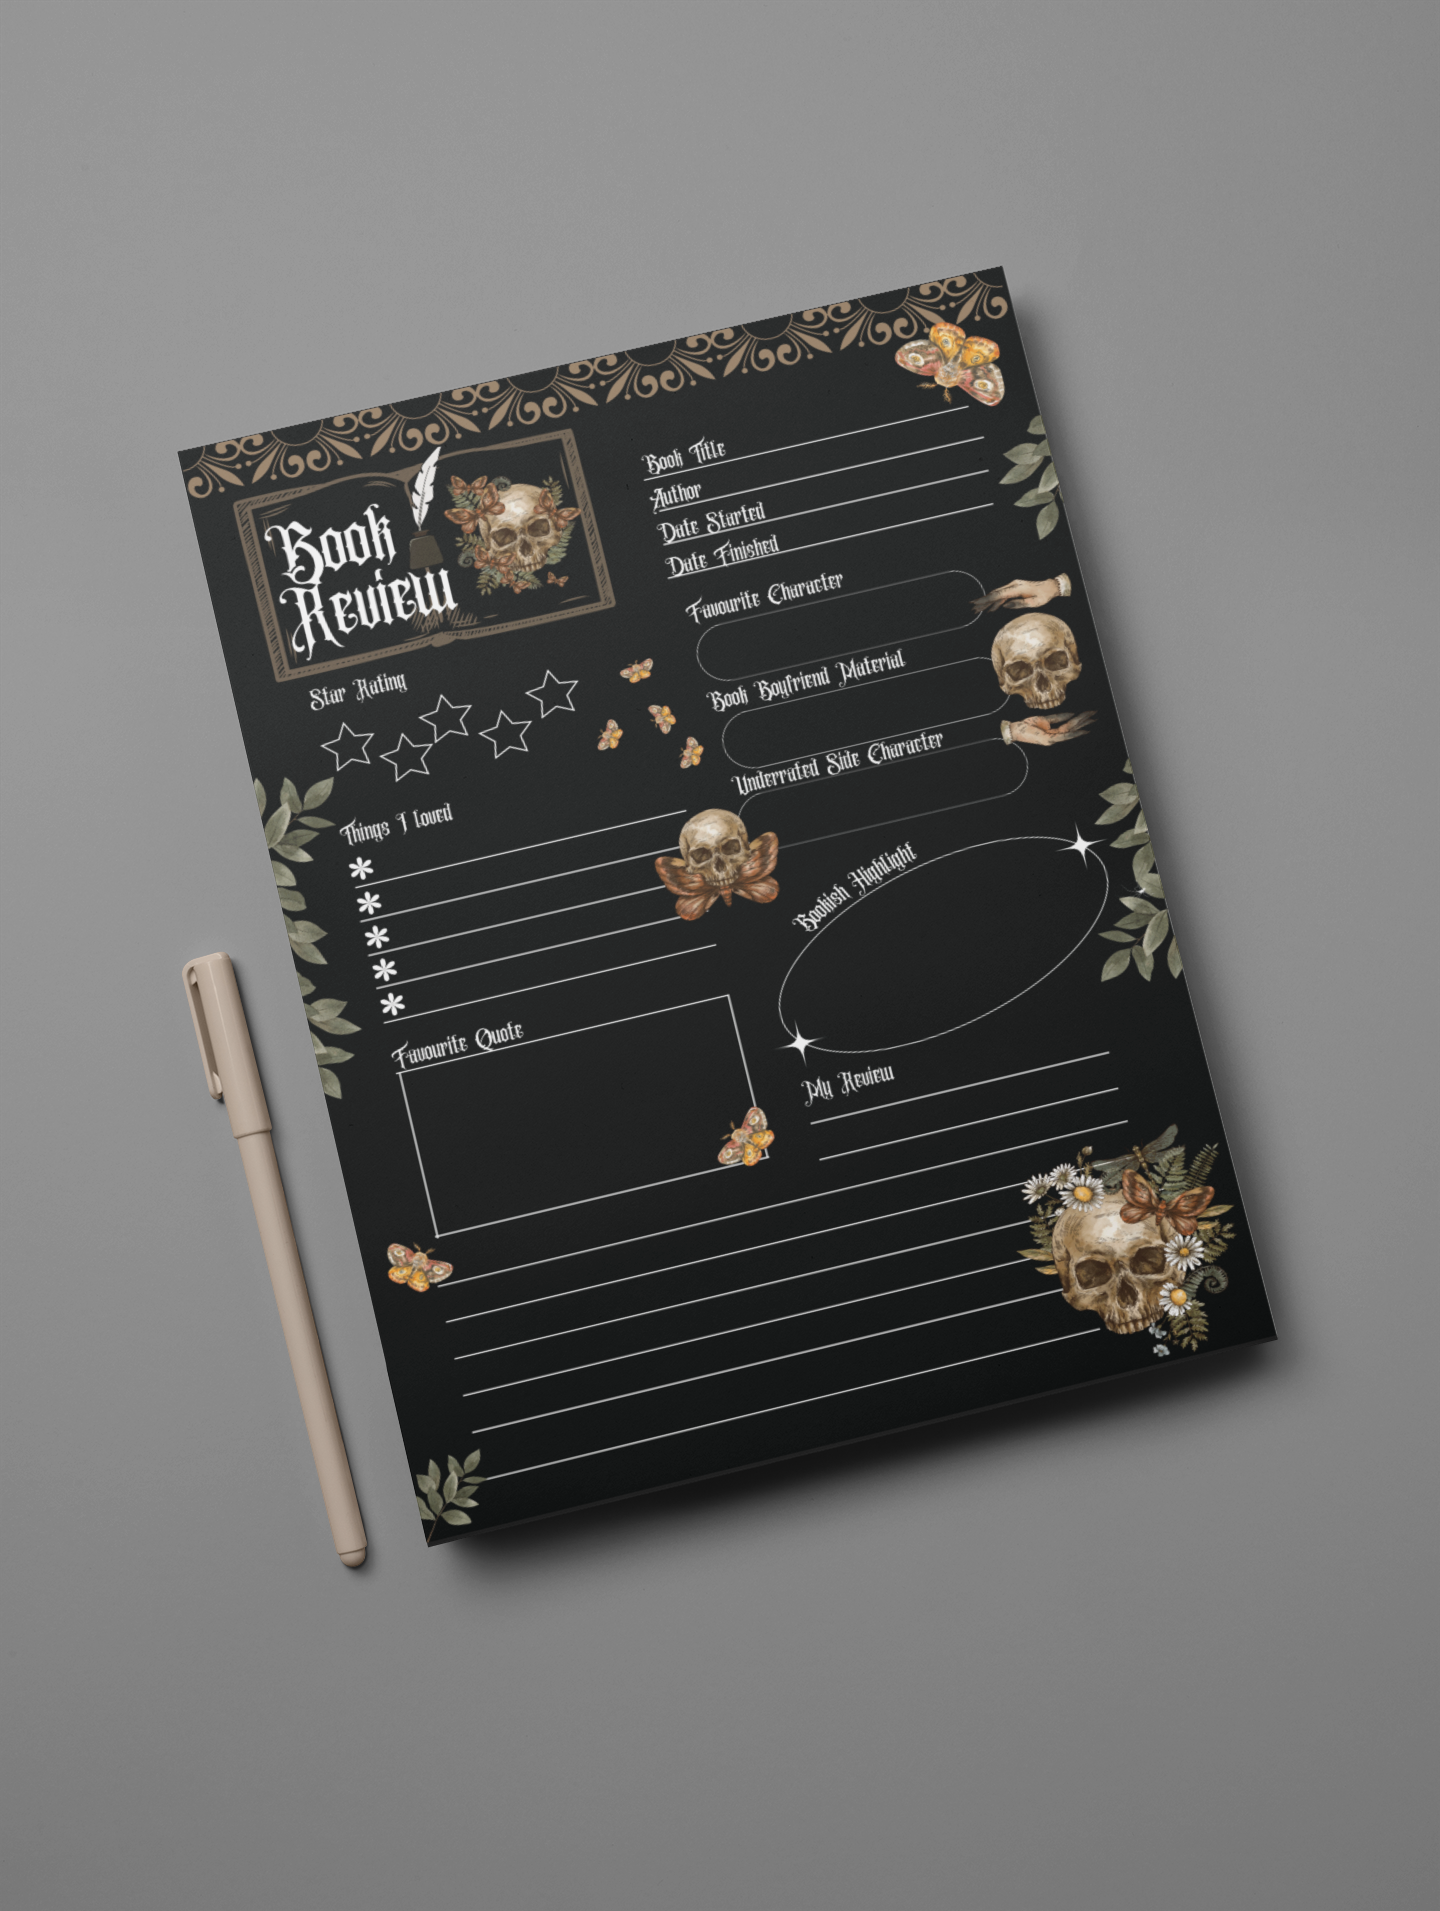 Book Review Notepad - Dark and Moody